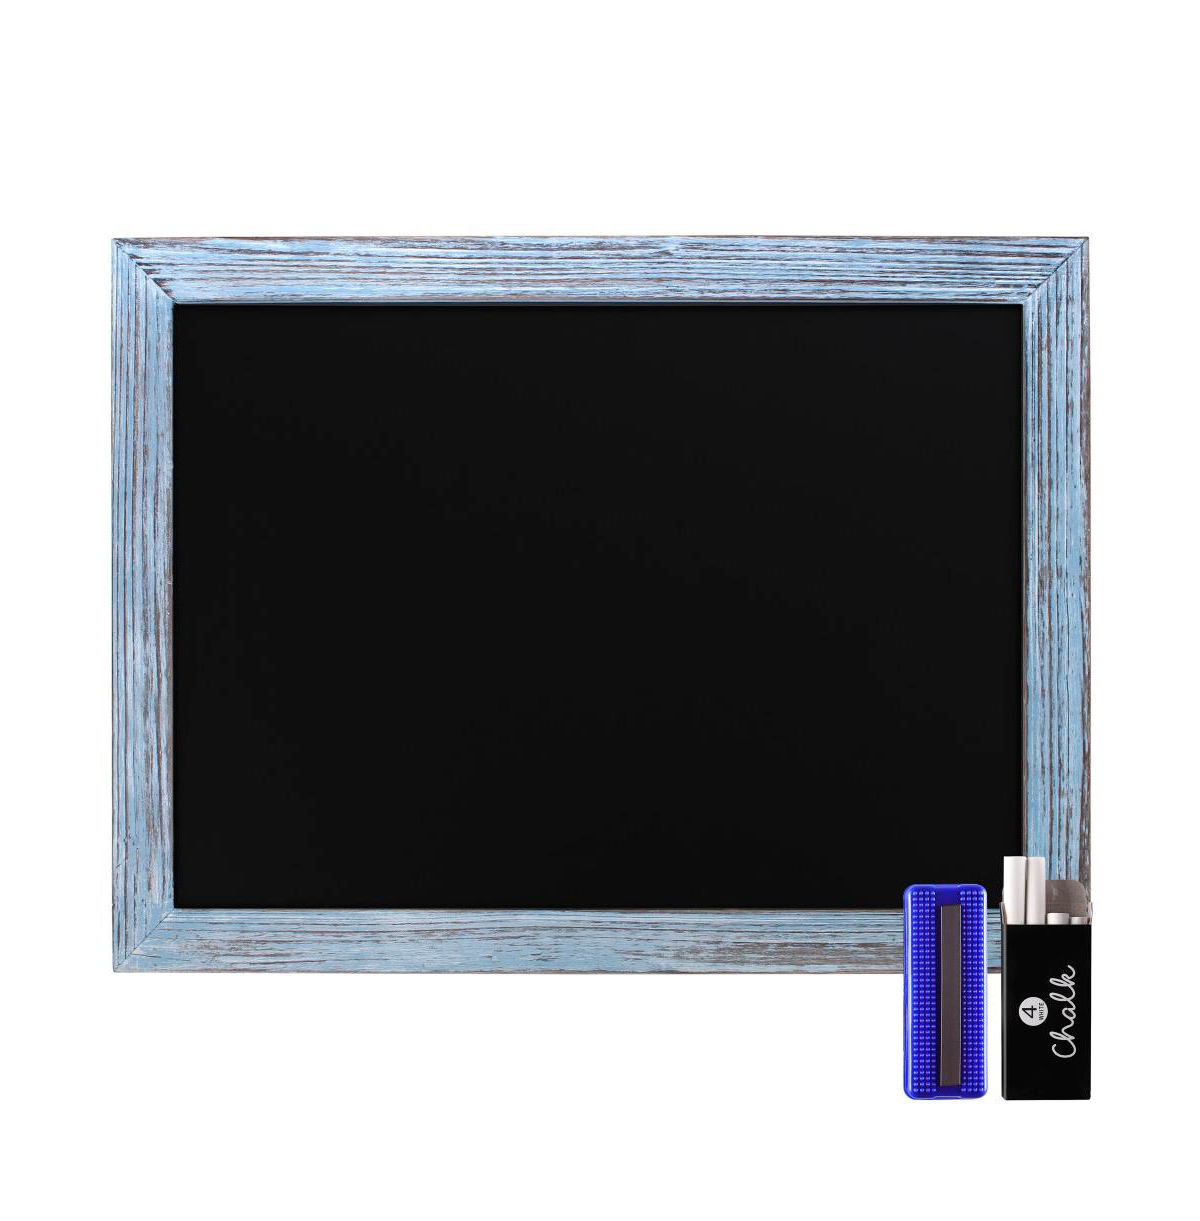 Wall Mounted Magnetic Chalkboard with Wooden Frame - Solid white